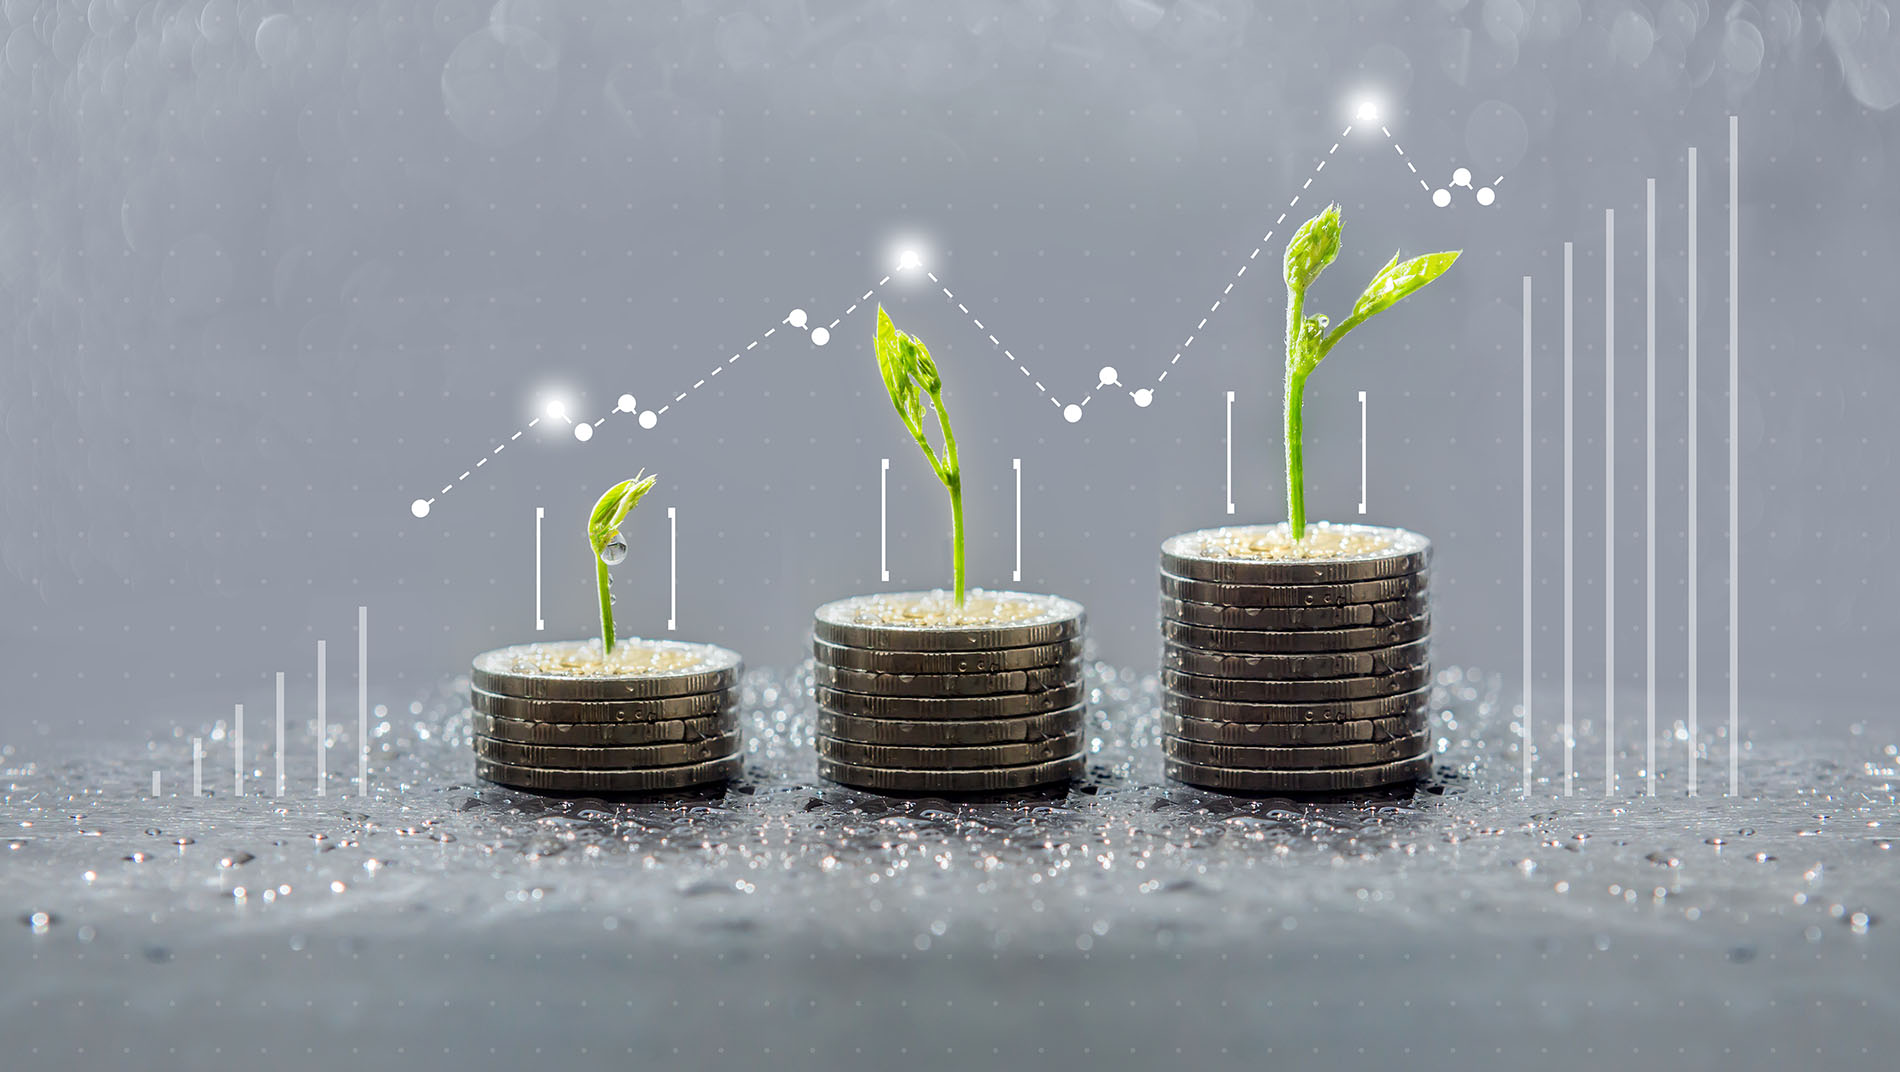 Trees growing on coins, sustainable finance